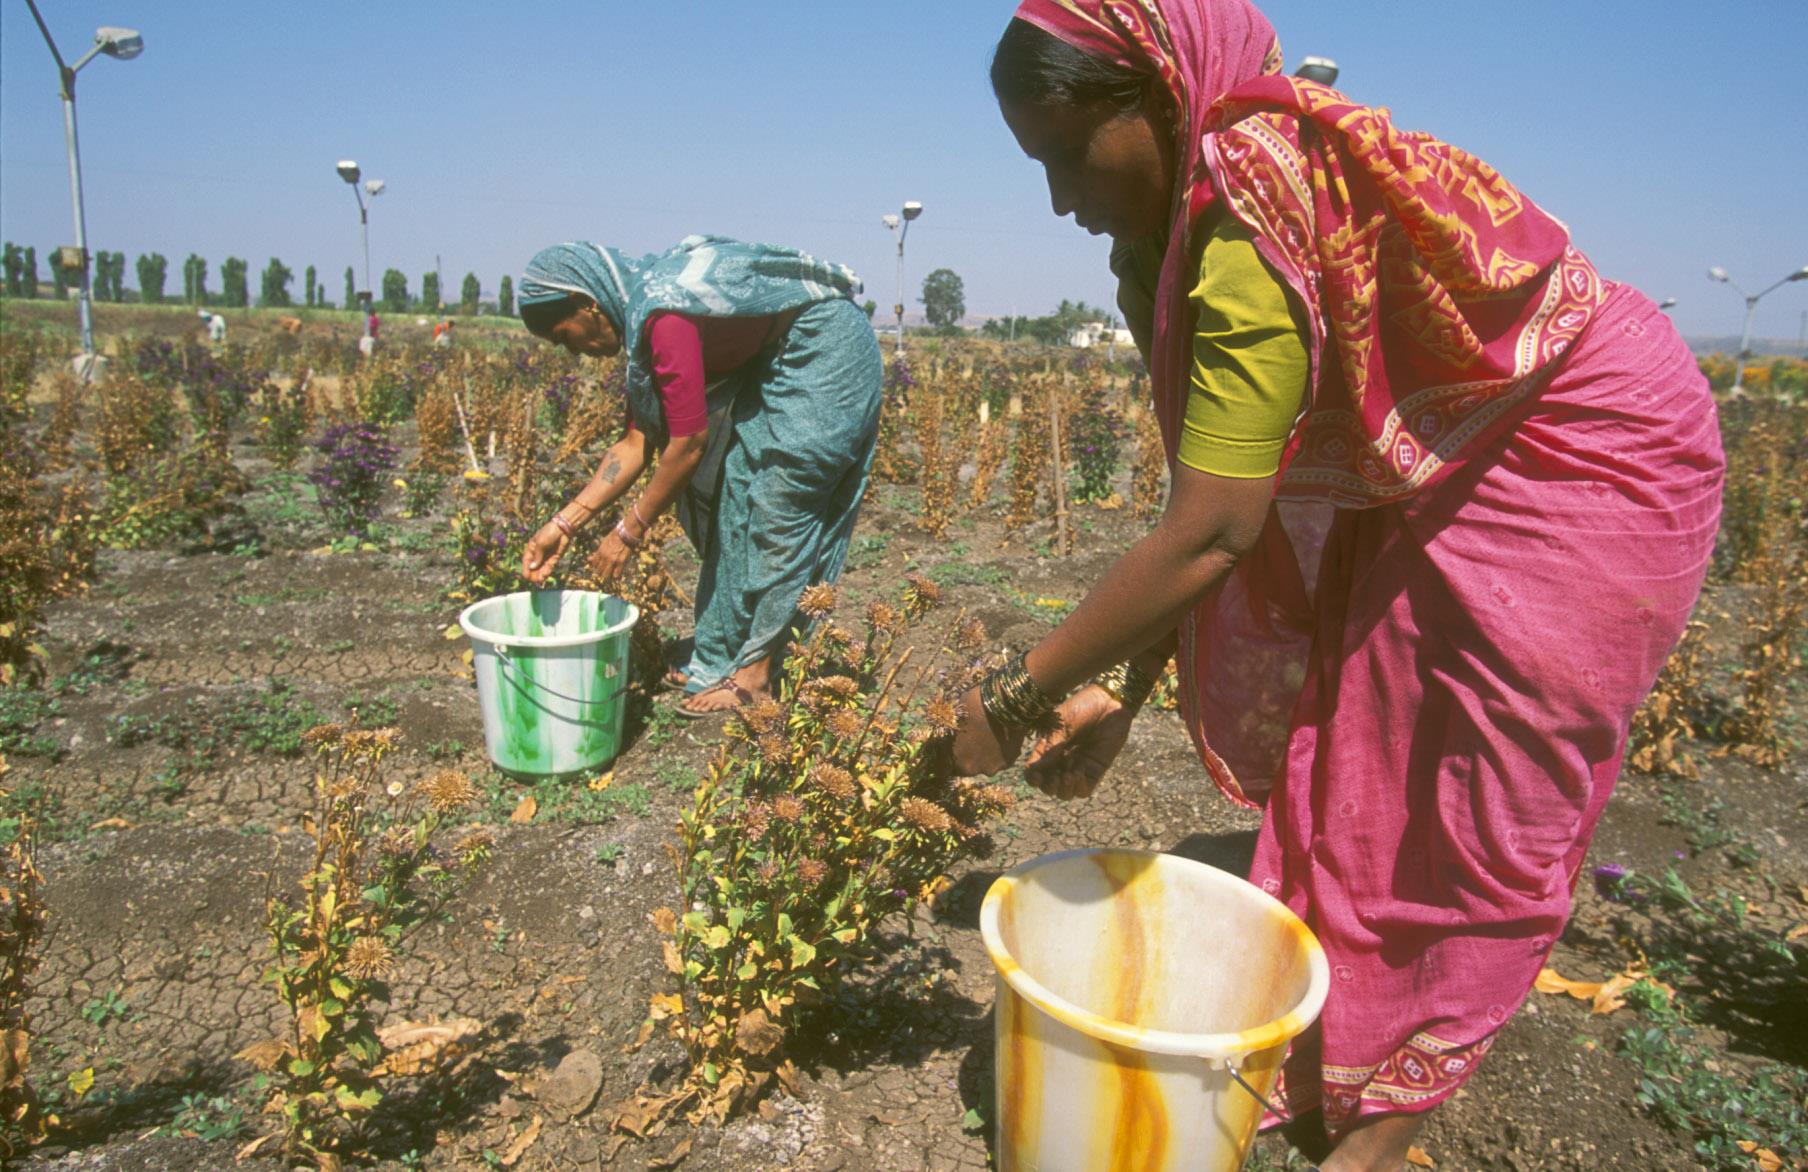 FAO and India's SEWA seek closer cooperation to boost rural women's access to land, skills and financial resources